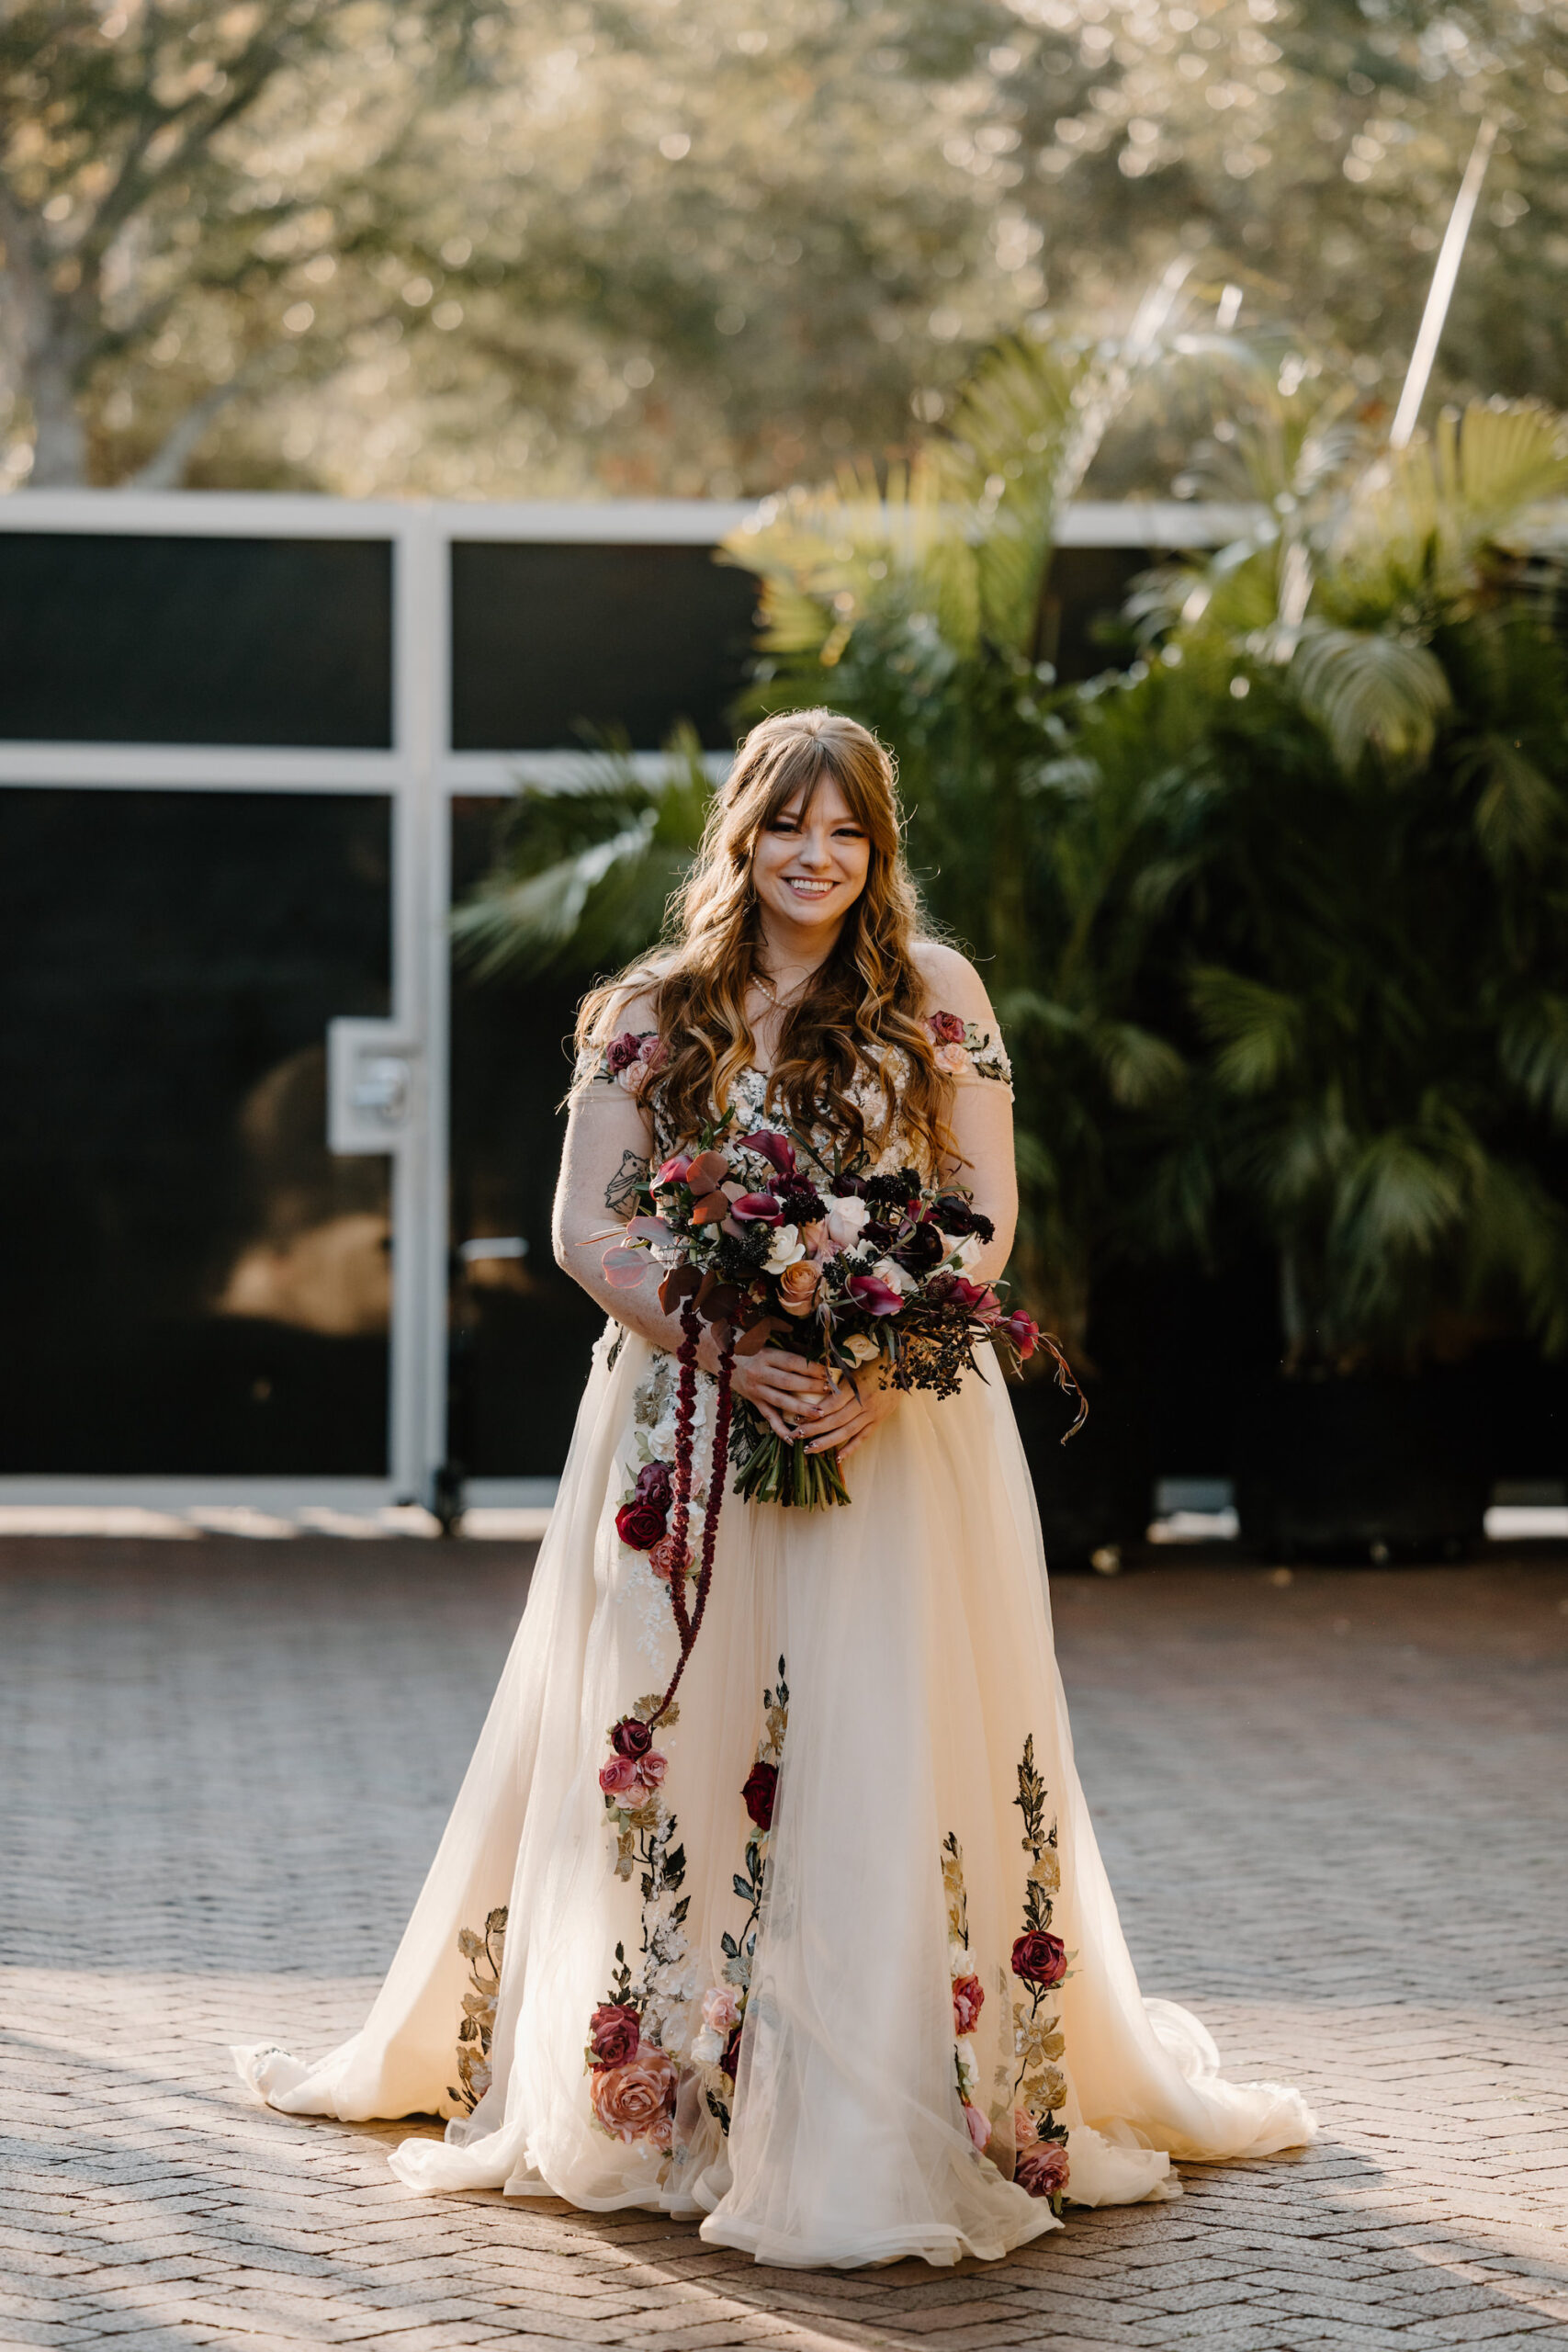 Bride Walking Down the Wedding Ceremony Aisle | Dark Moody Floral Bridal Wedding Bouquet | Off the Shoulder Nude and Red, White, Green, and Blush Pink Floral Applique A-Line Wedding Dress with Chapel Length Train